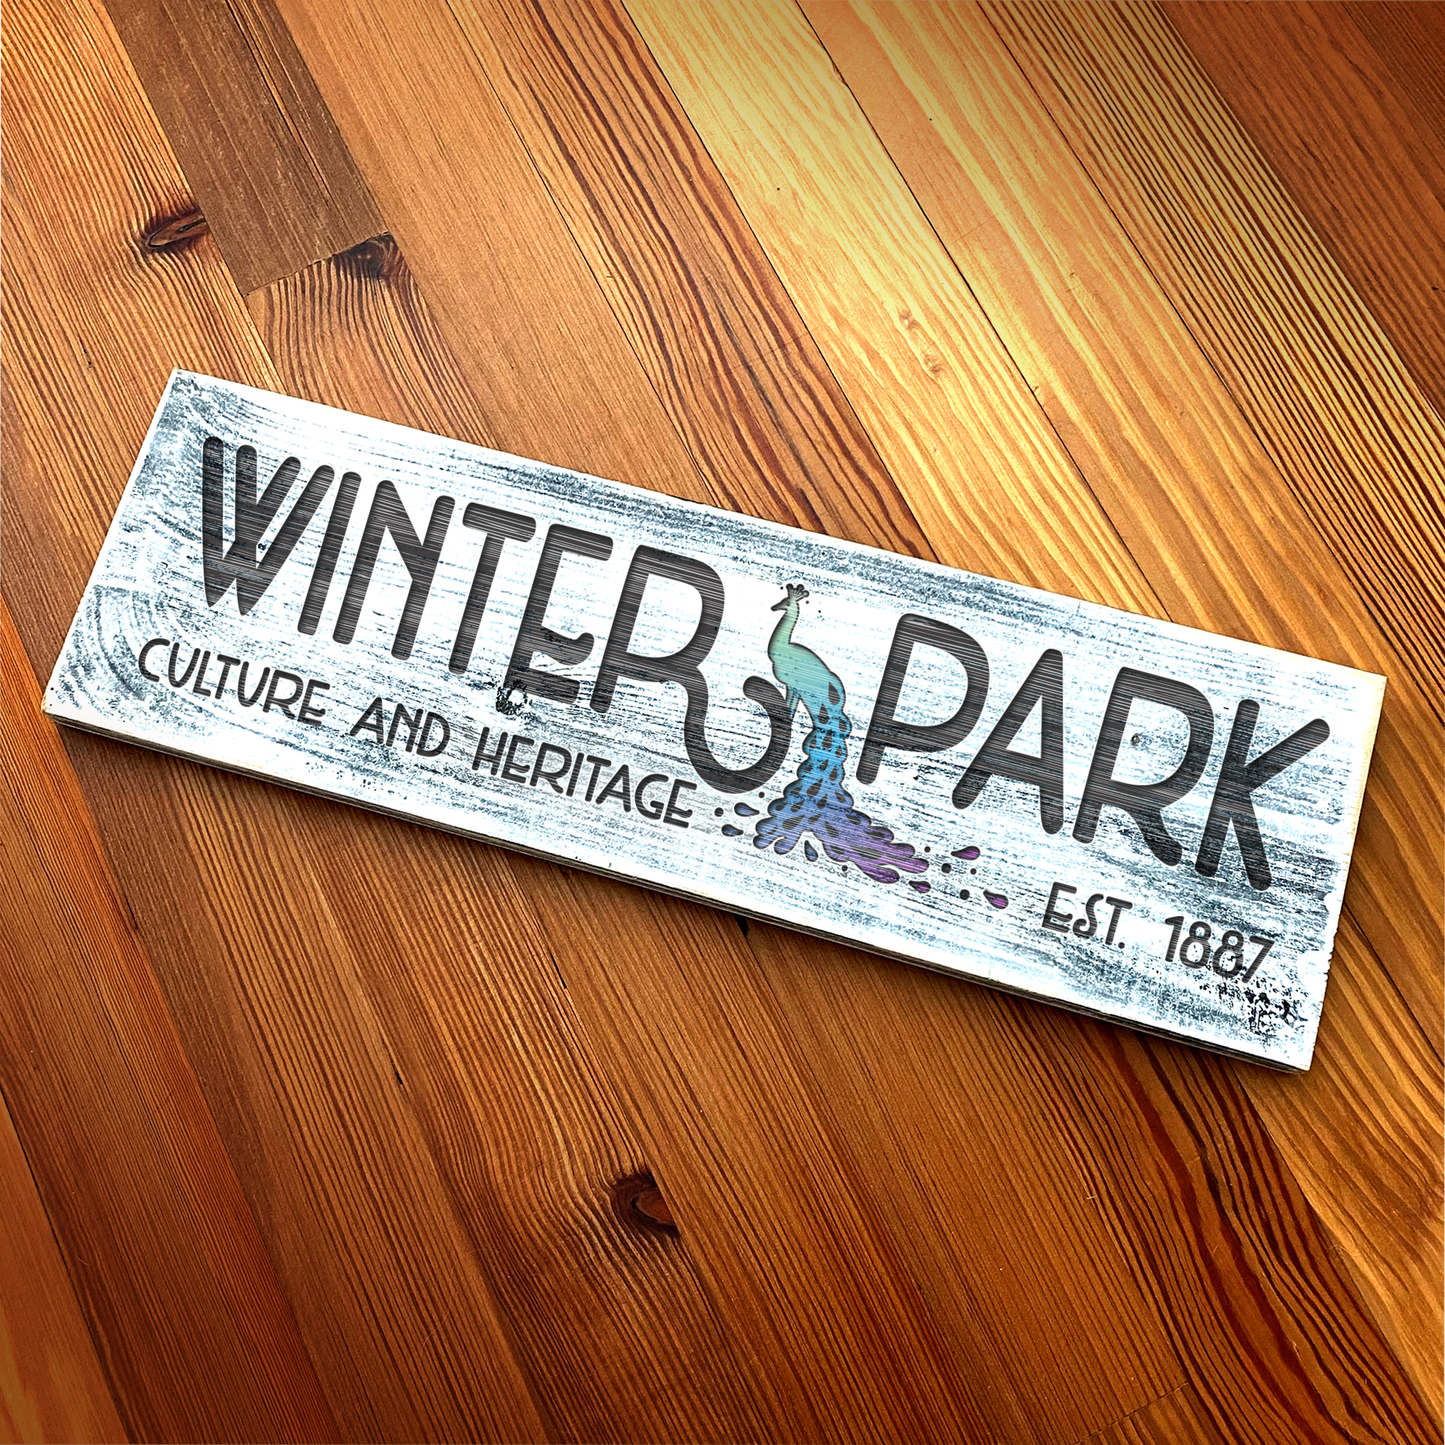 Winter Park Peacock - Handcrafted Artisan Wood Sign